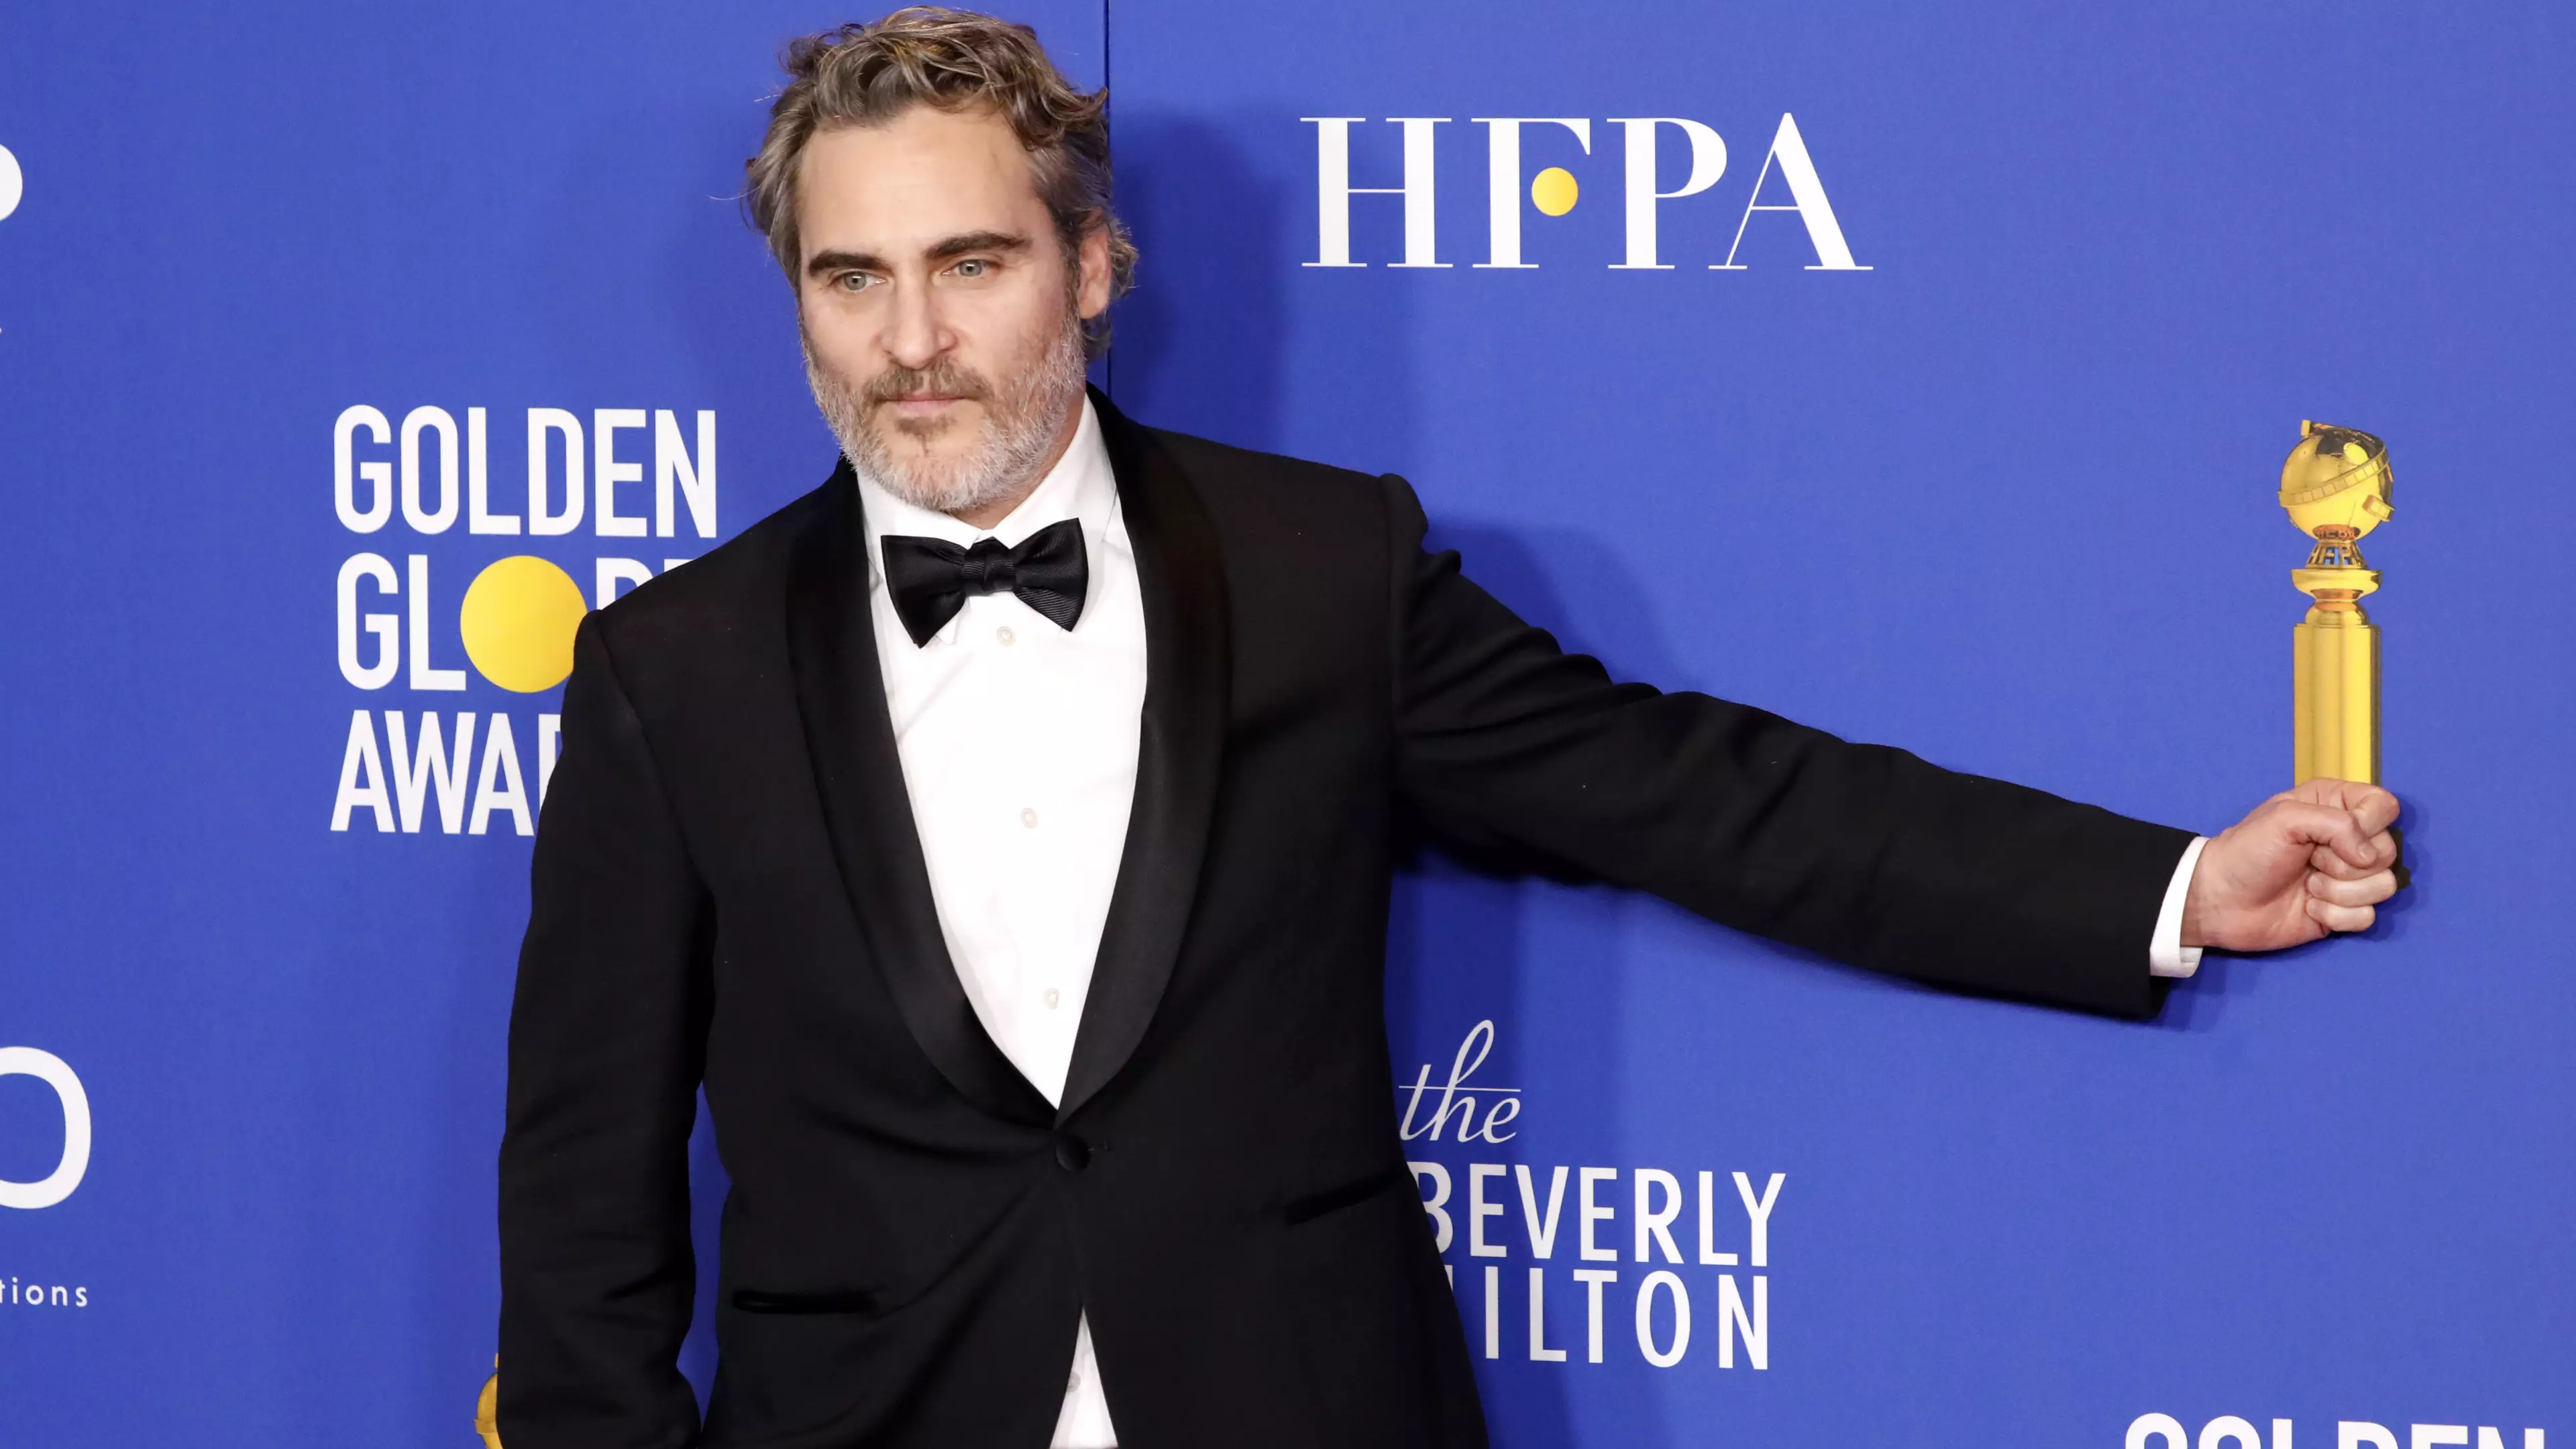 Joaquin Phoenix Will Wear Same Tuxedo To Every Awards Show This Year To 'Reduce Waste'